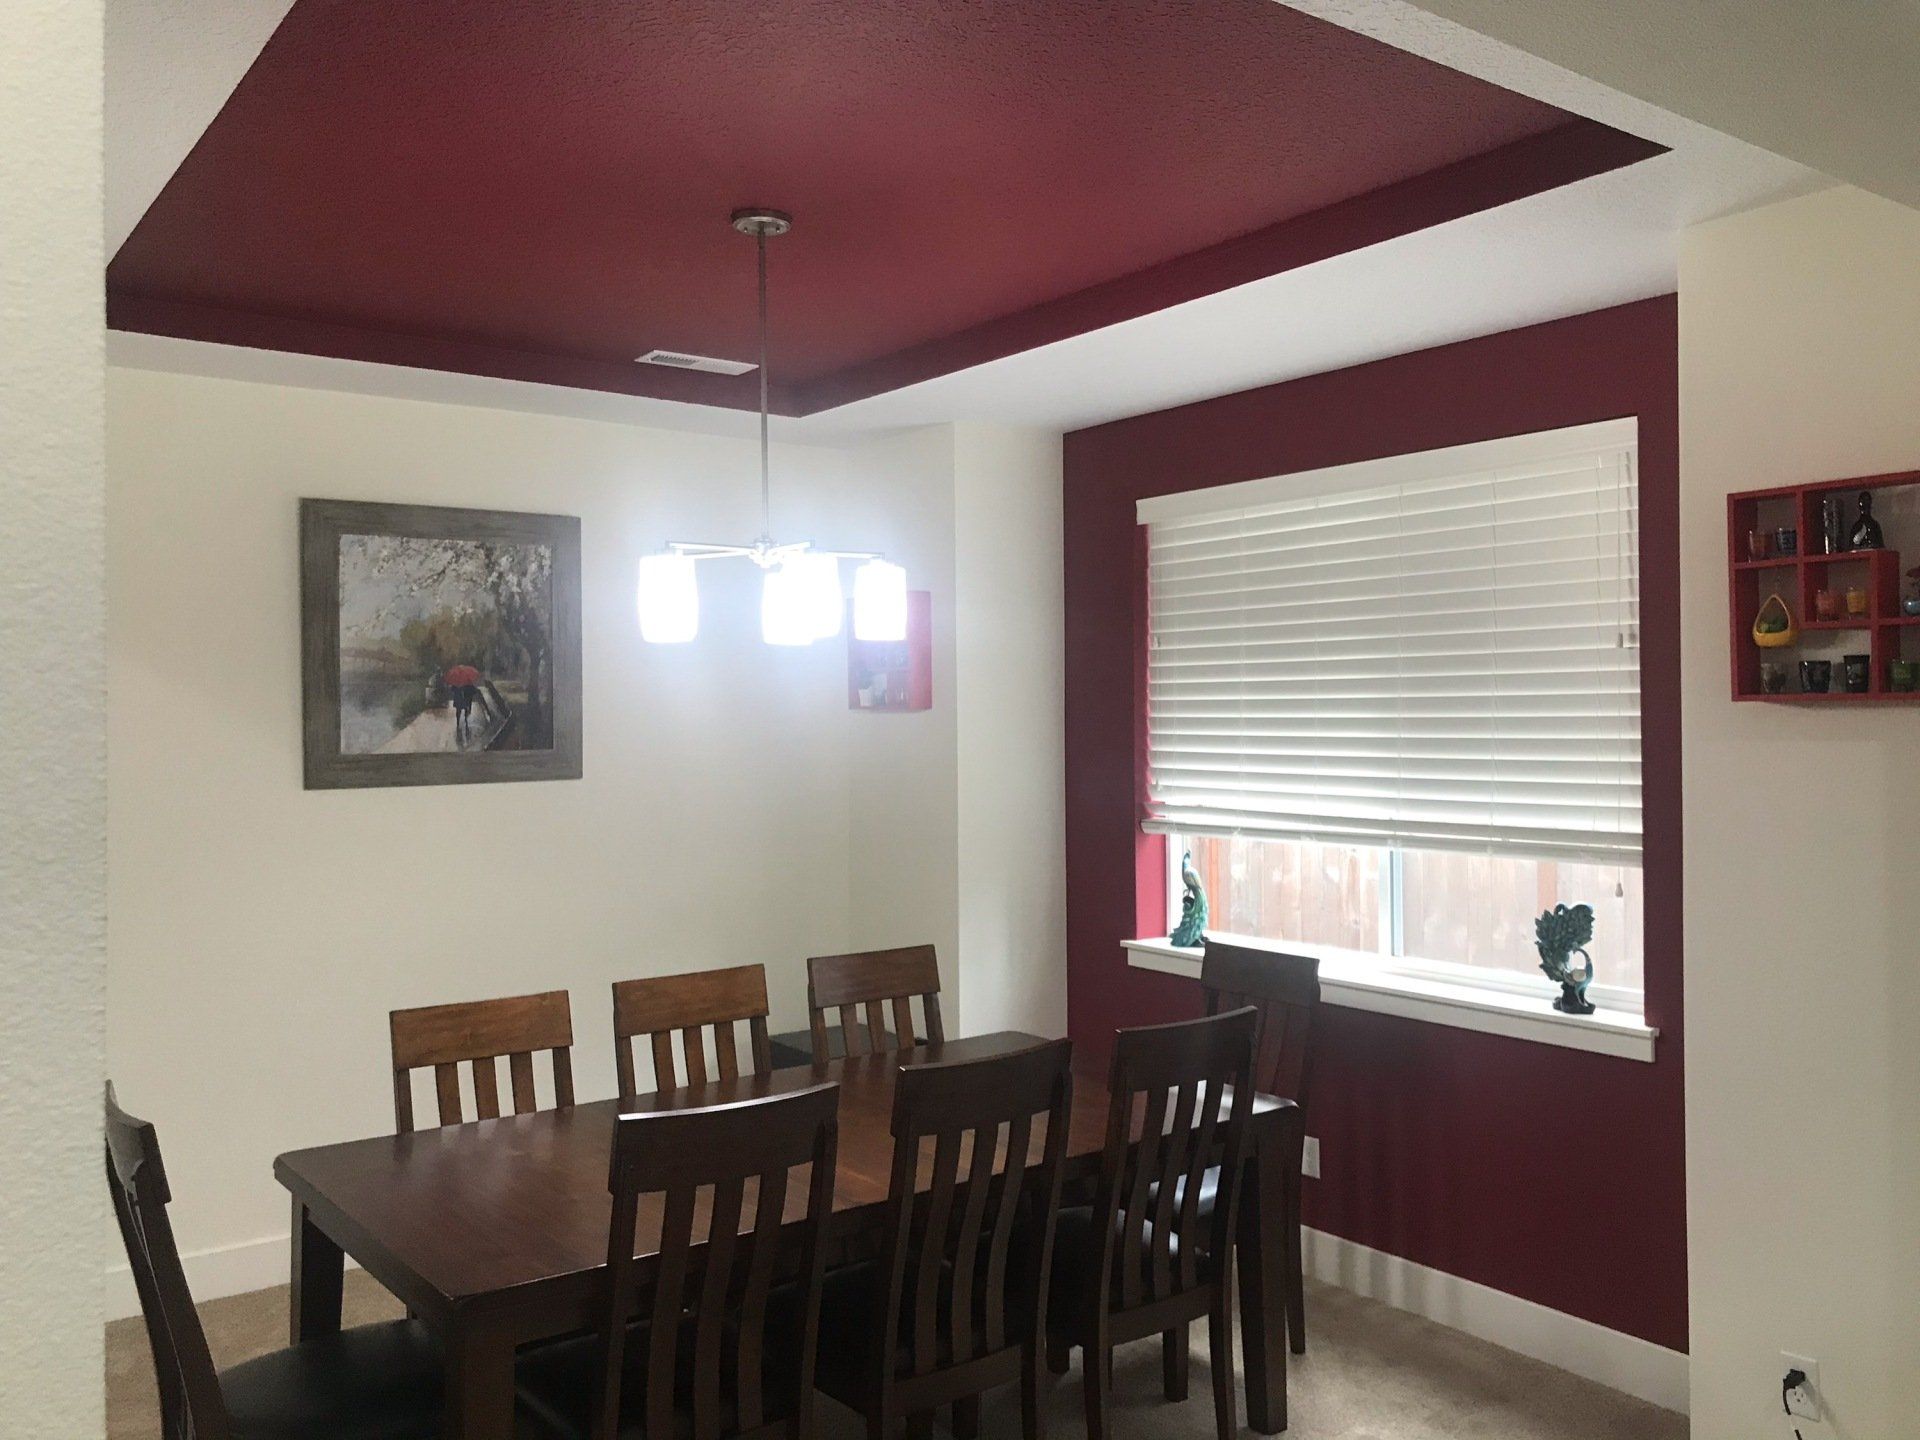 Picture of a dining room with a red ceiling and accent wall.